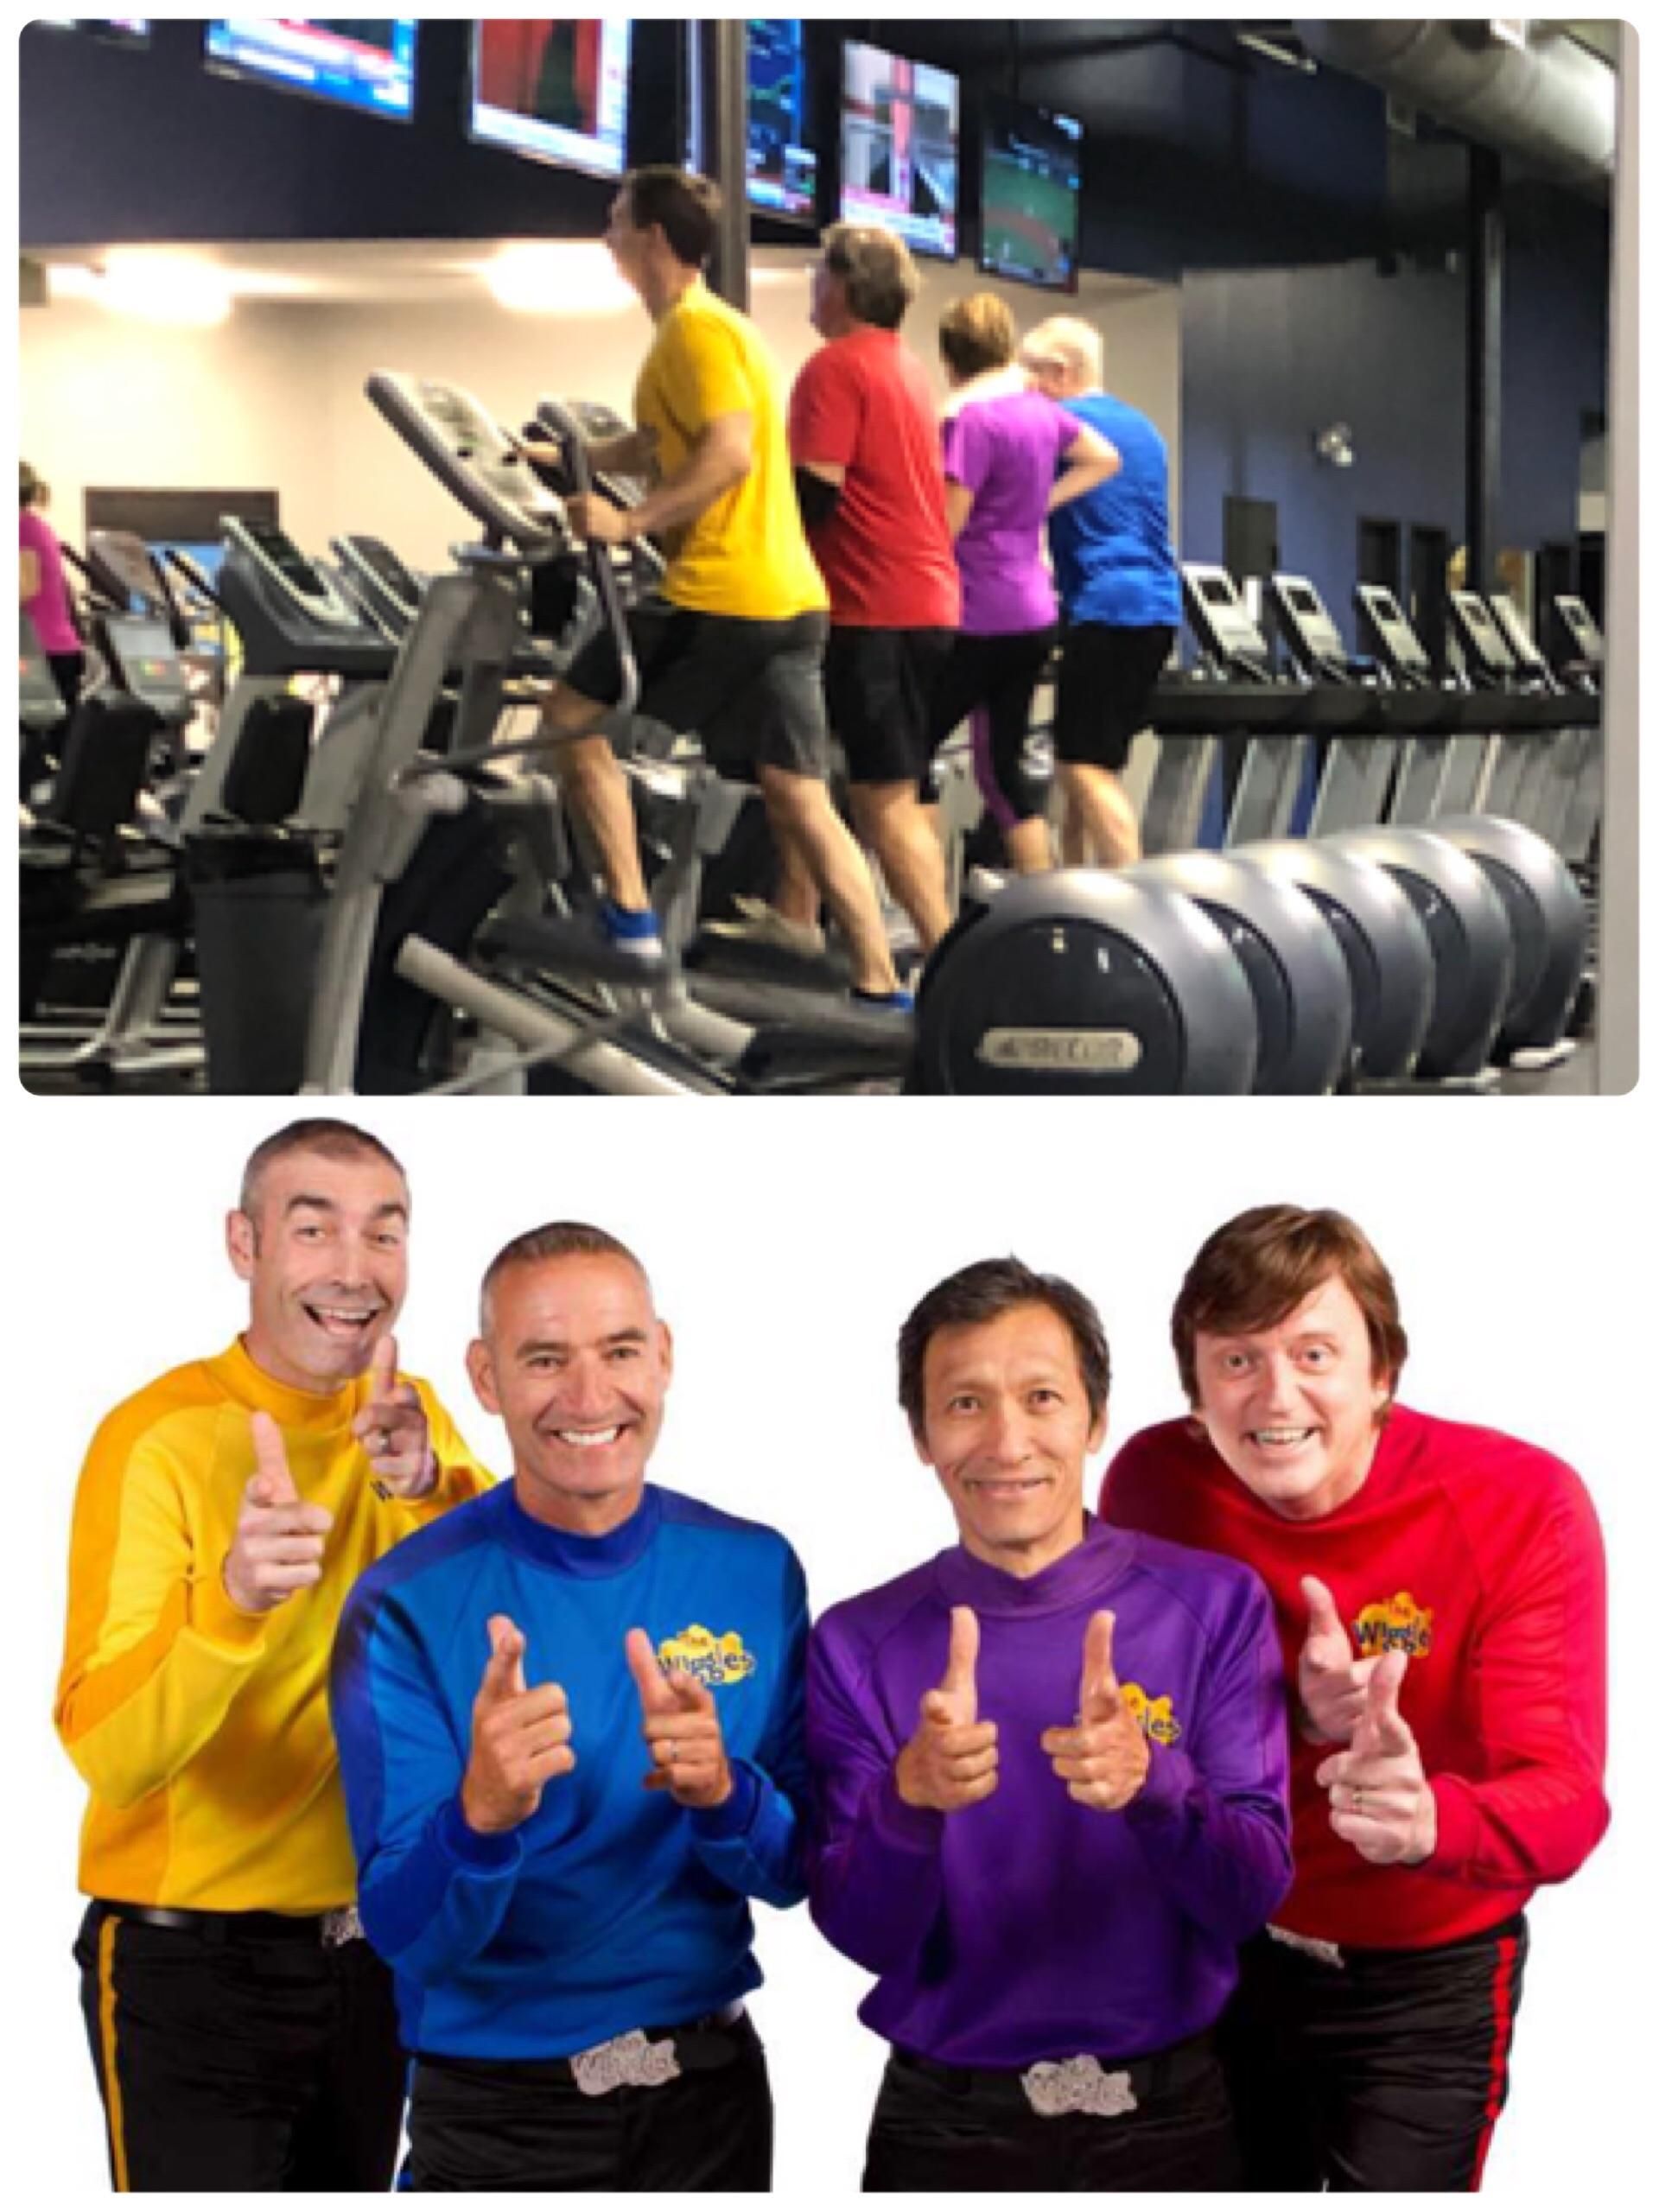 Spotted The Wiggles at the gym this morning